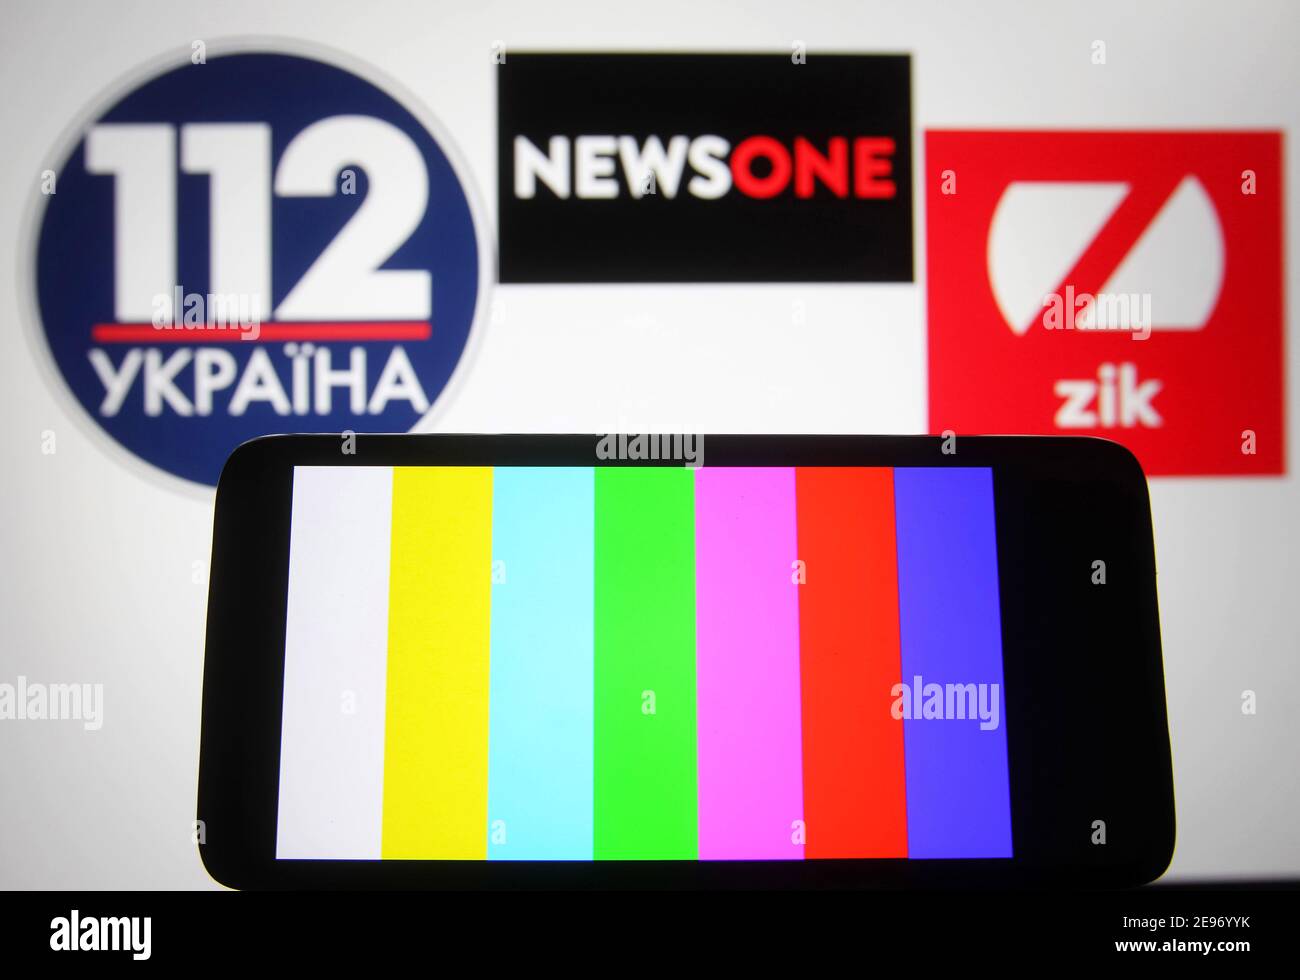 In this photo illustration a rainbow TV test pattern without broadcast on Zik TV channel is seen displayed on a mobile phone screen in front of 112 Ukraine, NewsOne and ZIK logos of Ukrainian TV channels.112 Ukraine, NewsOne and ZIK Ukrainian TV channels are blocked in Ukraine, as Ukraine's media reported late evening on February 02. Ukrainian President Volodymyr Zelensky has put into force a decision by the National Security and Defence Council of February 2, 2021, on applying sanctions against lawmaker Taras Kozak, who is believed to be an ally of pro-Russian politician and the Chairman of t Stock Photo